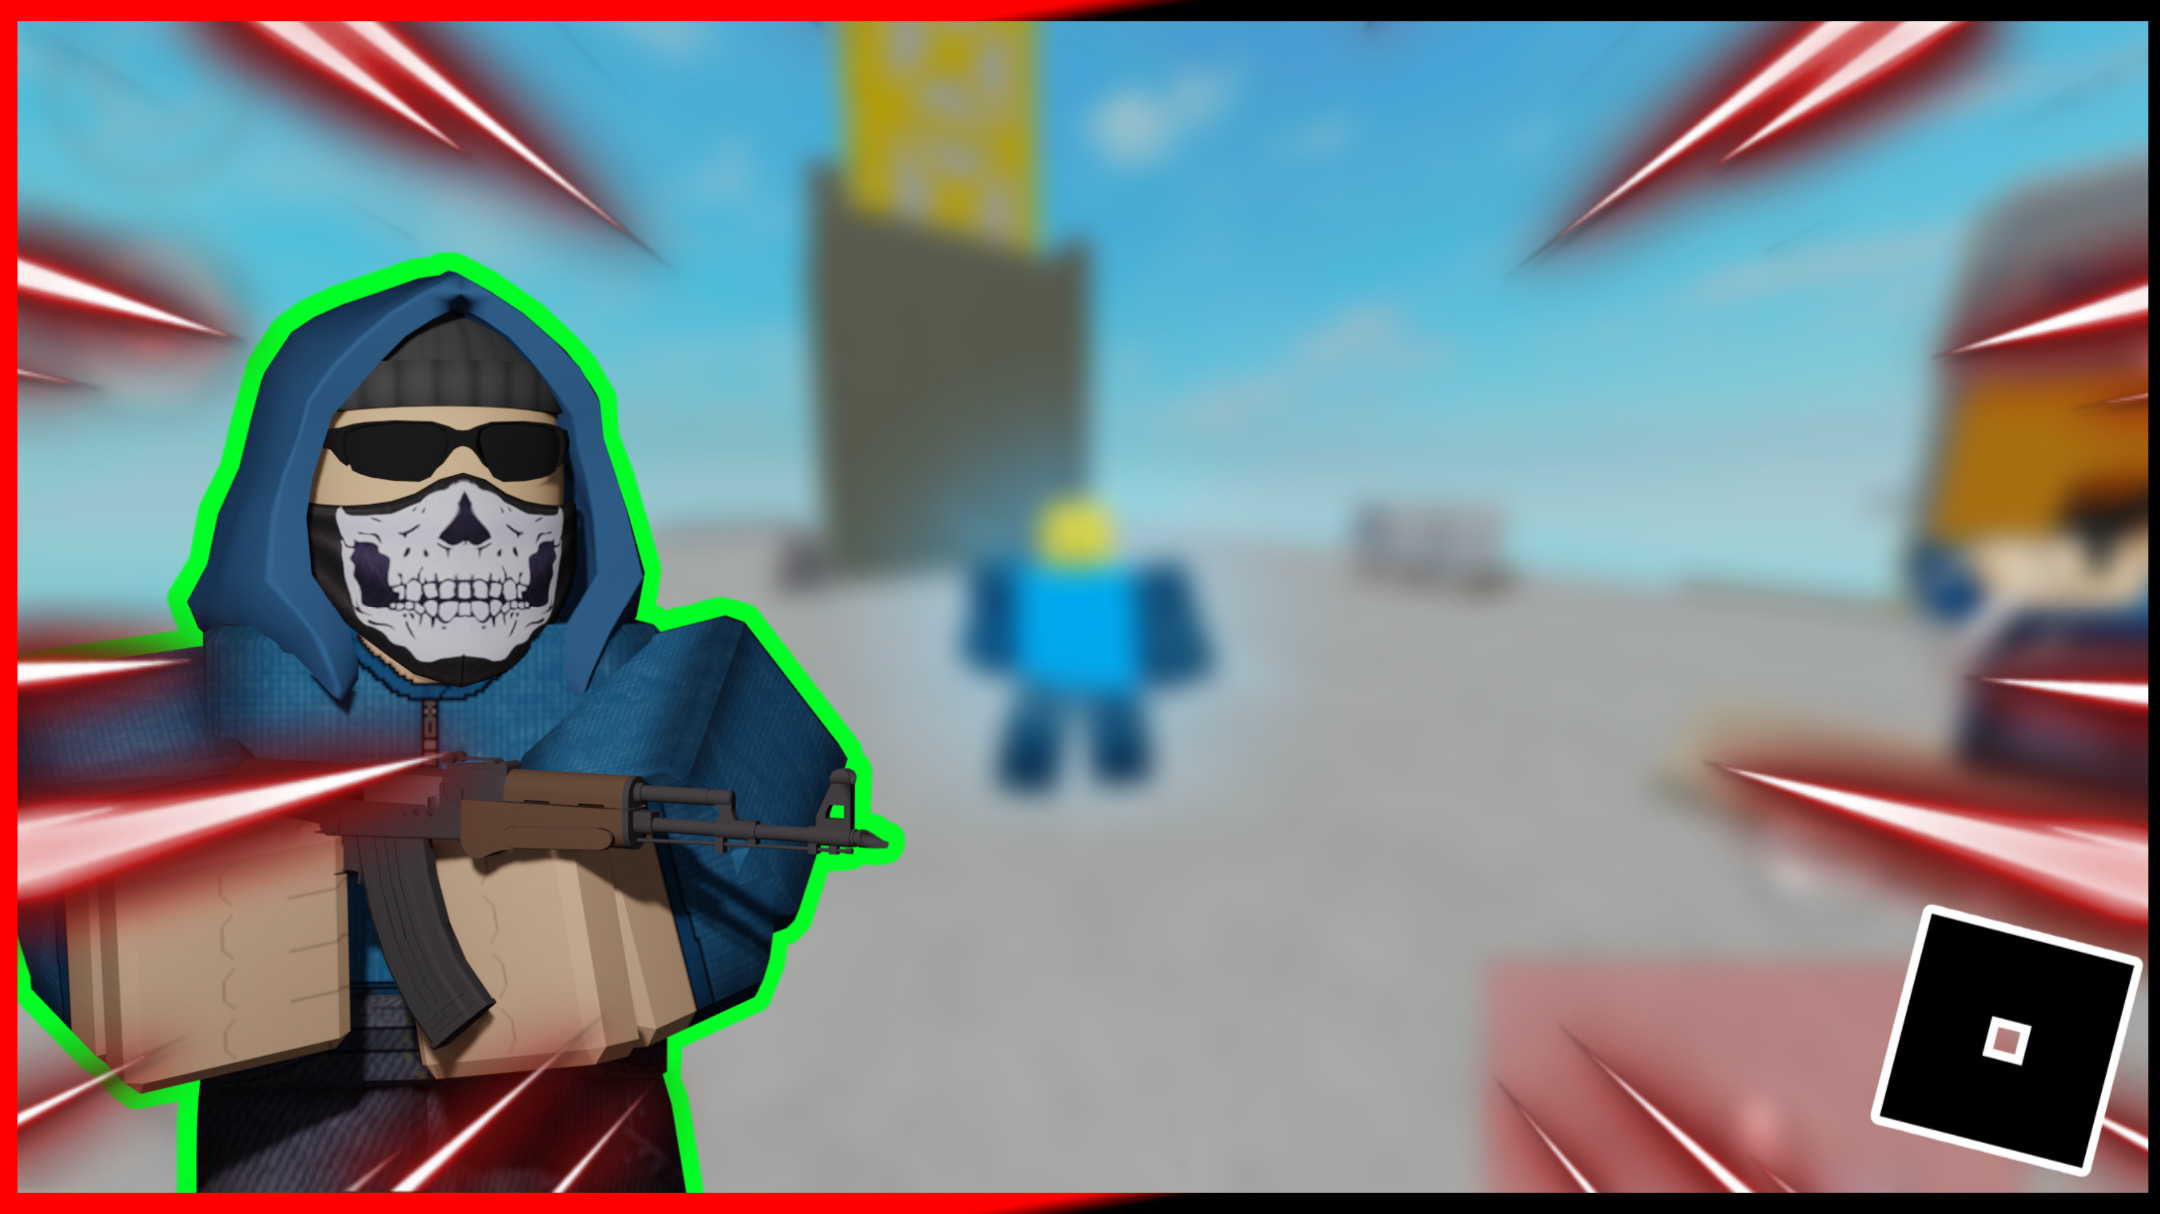 Thumbnail Roblox Arsenal Thumbnail Image By Glitch - how to add a thumbnail to a roblox game